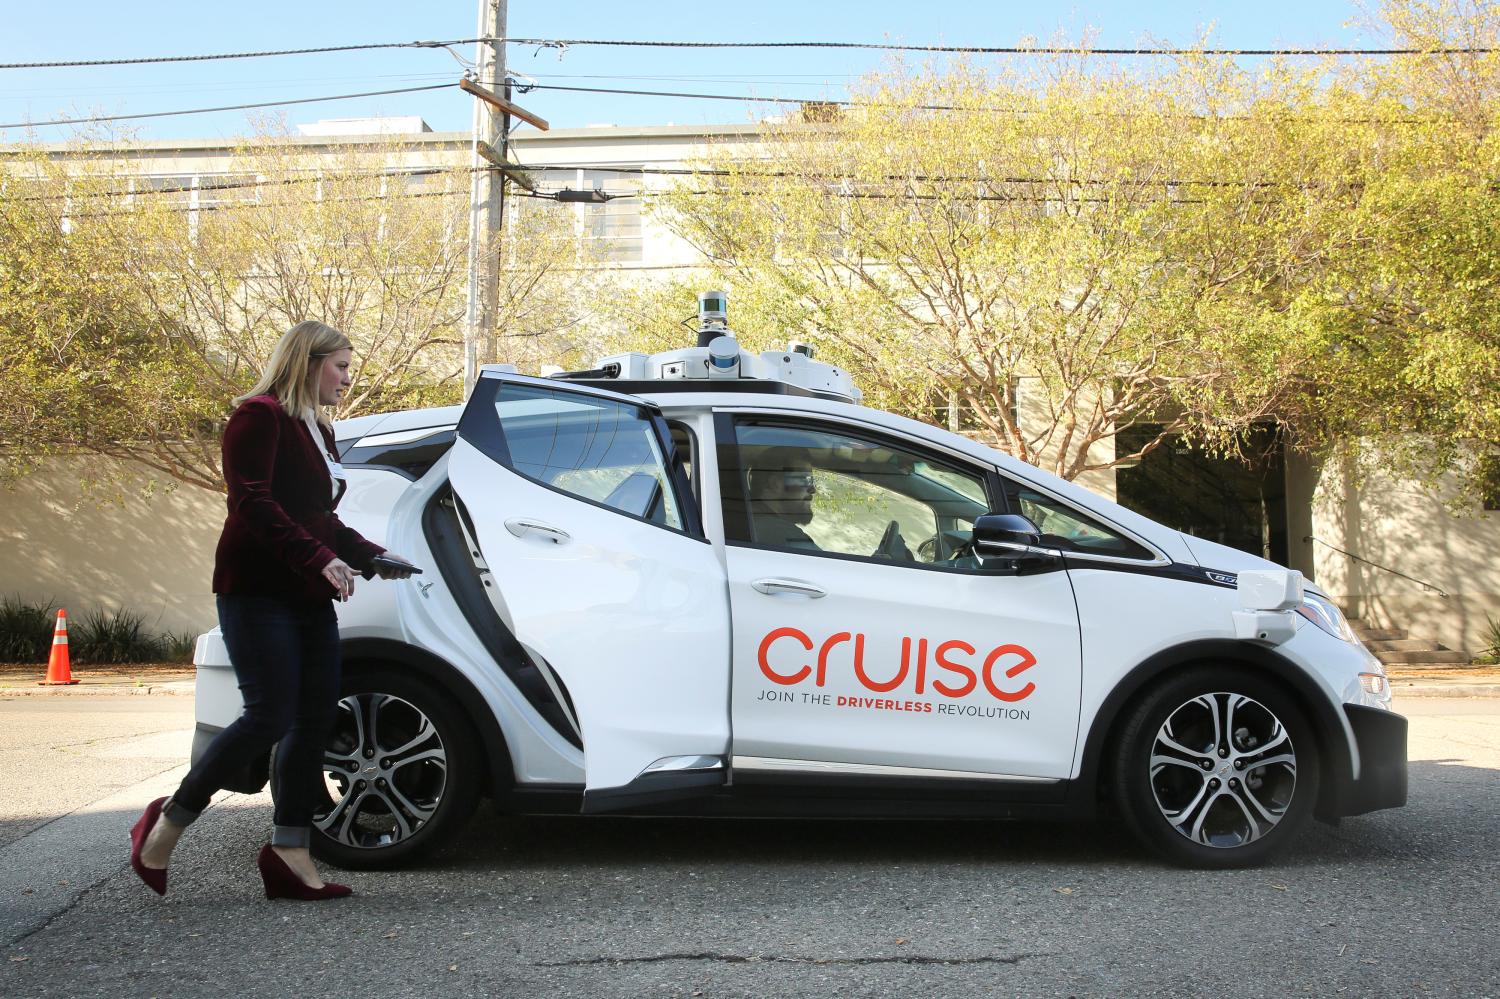 A woman gets in a self-driving Chevy Bolt EV car during a media event by Cruise, GMs autonomous car unit, in San Francisco.